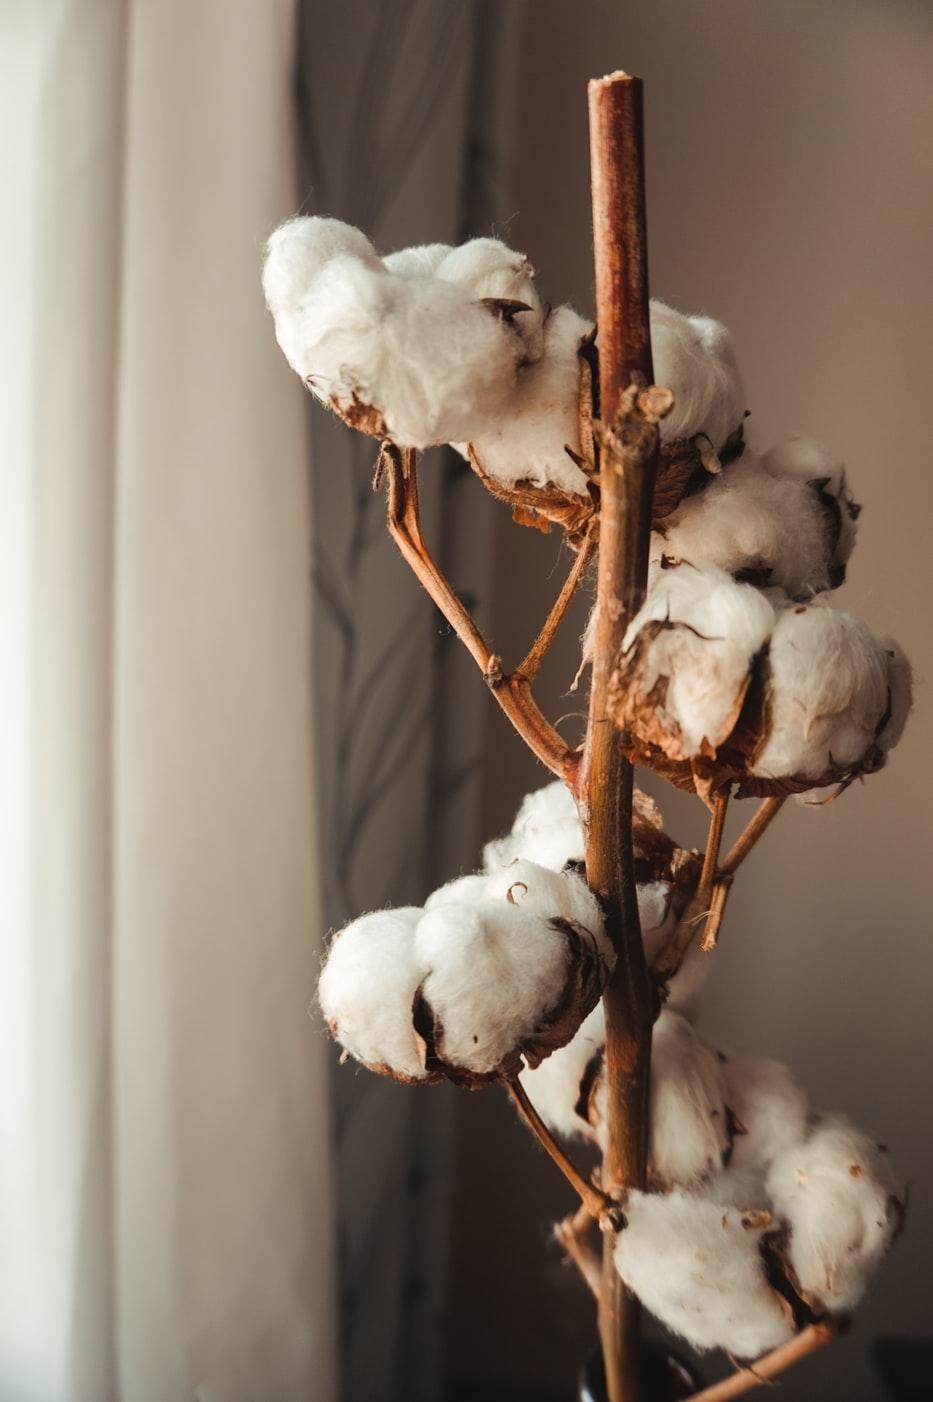 Organic cotton types, facts, certification and why you should buy